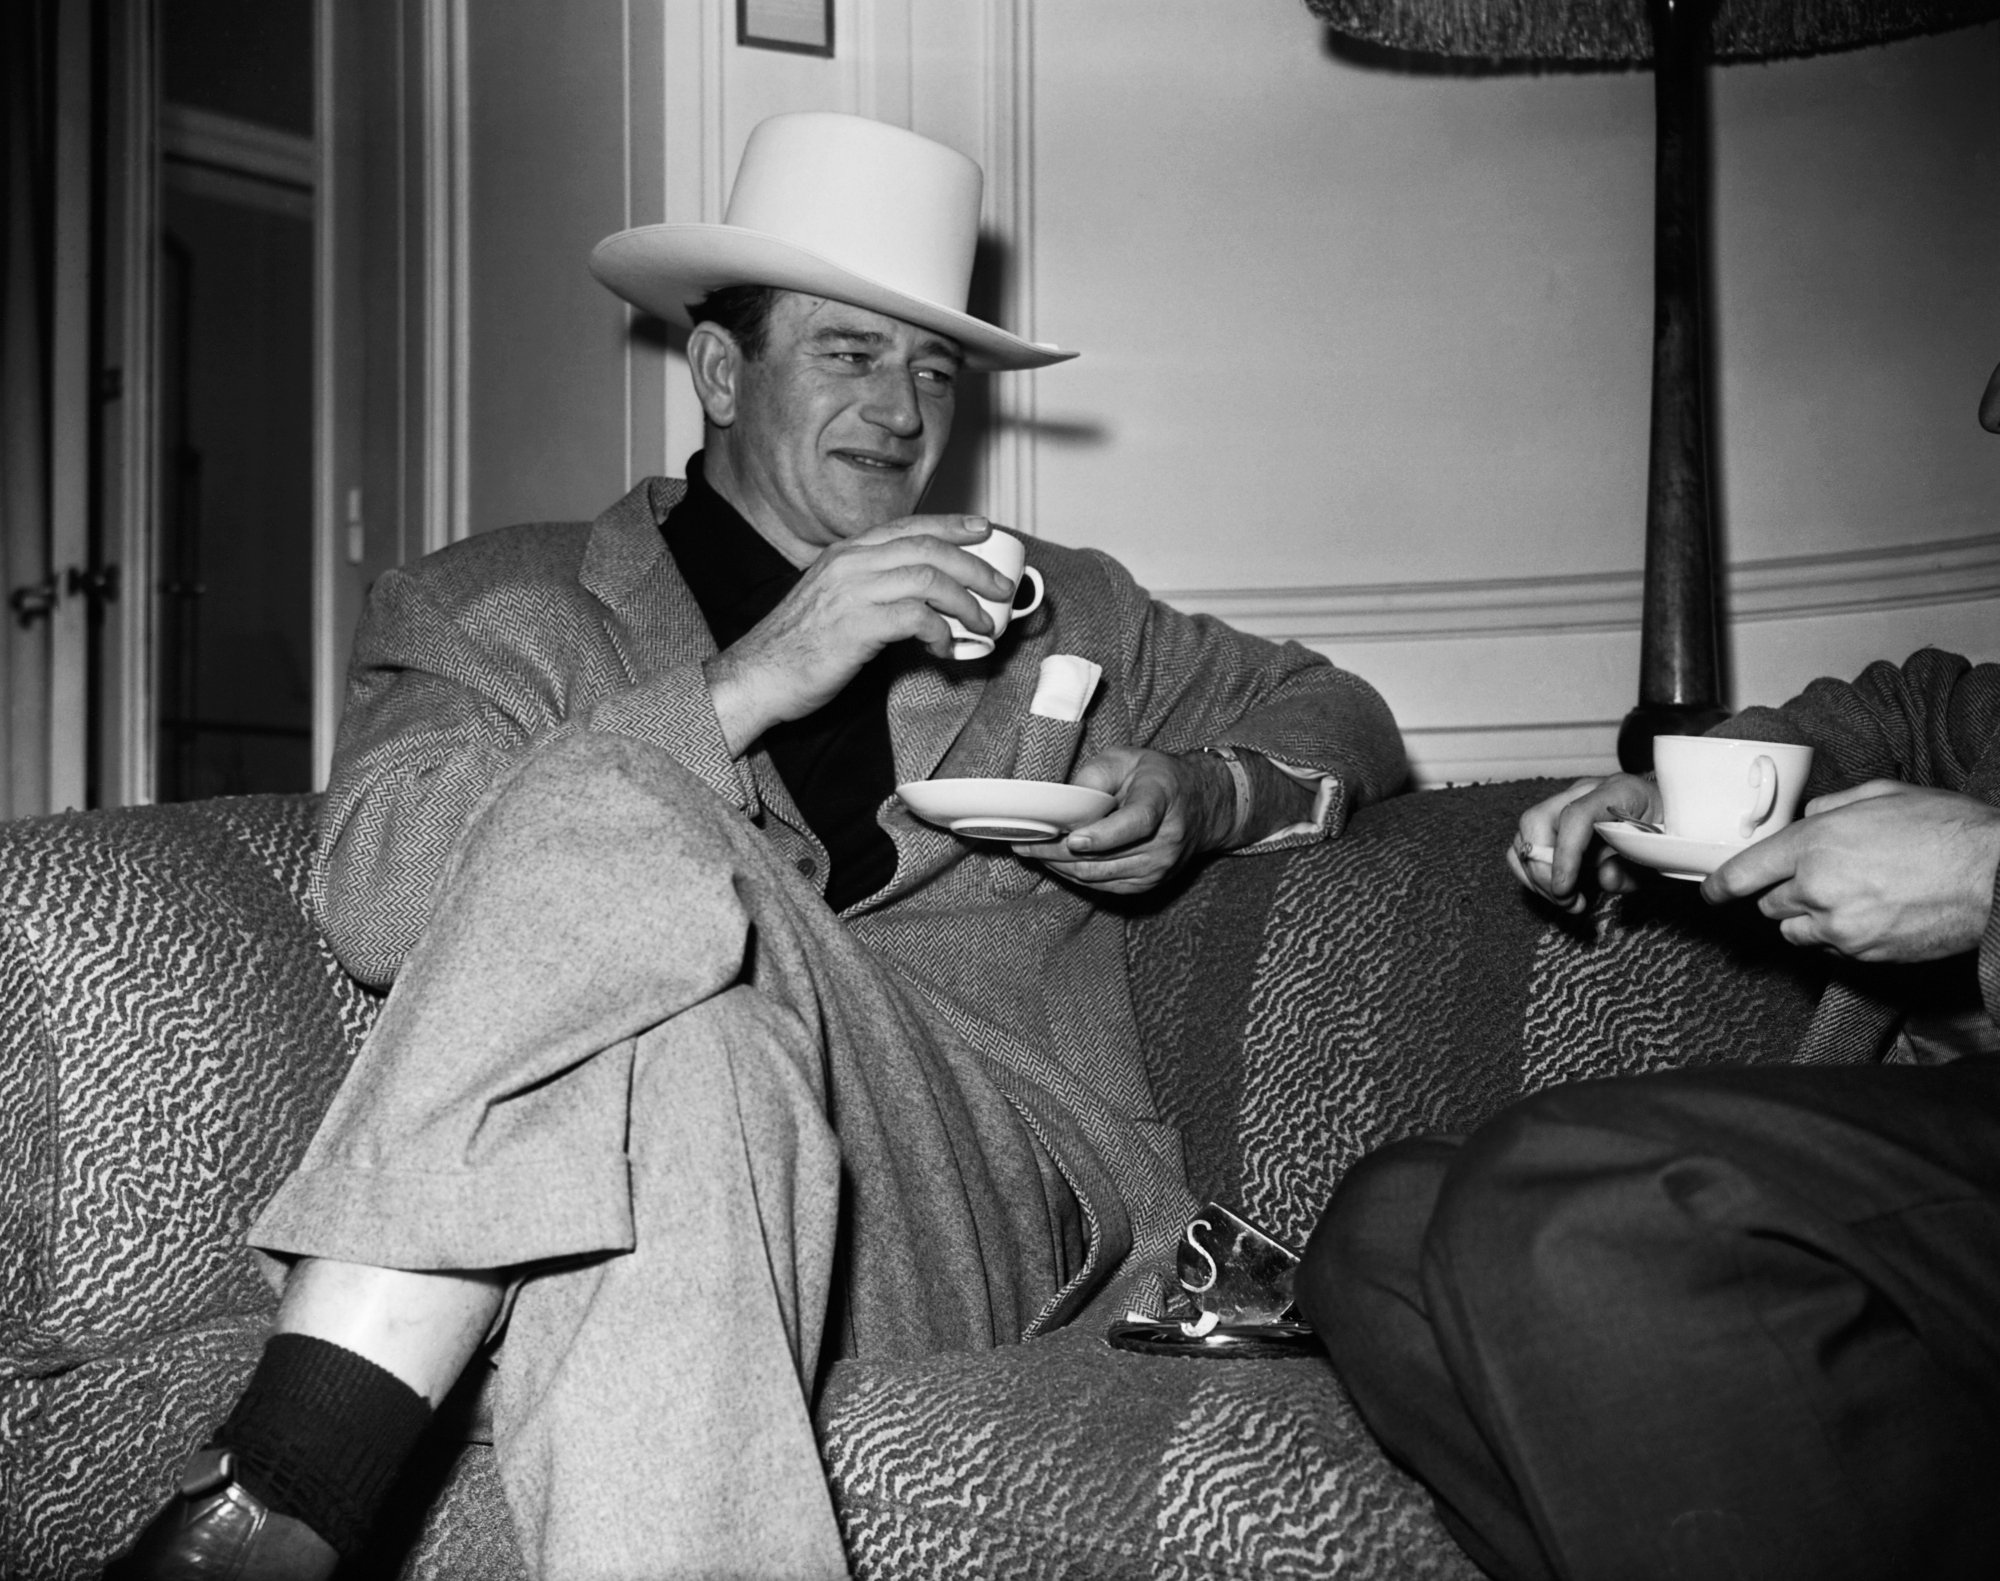 Actor John Wayne, who believed himself to be a liberal, wearing a suit and drinking from a tea cup